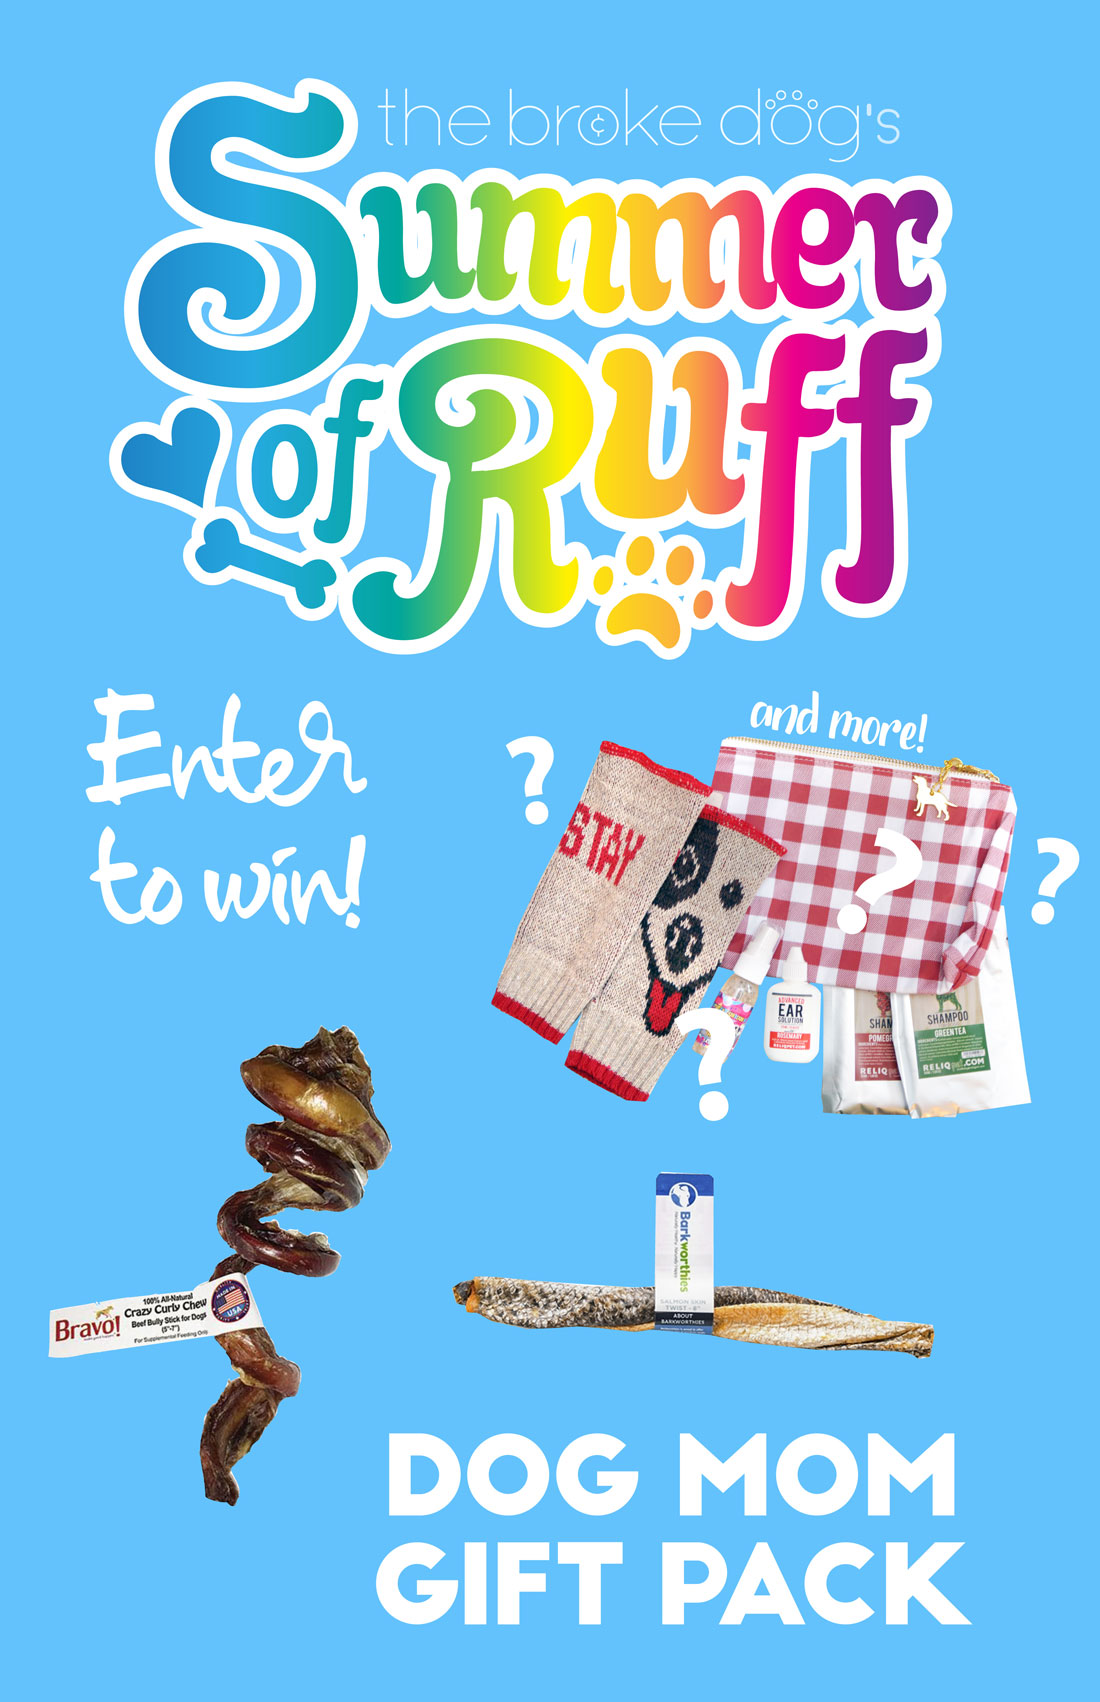 We're back for Week 6 of our weekly Summer of Ruff giveaway series! This week, we're giving away a super fun gift pack I'm calling the "Dog Mom" Gift Pack because it includes some goodies for you as well as for your dog!